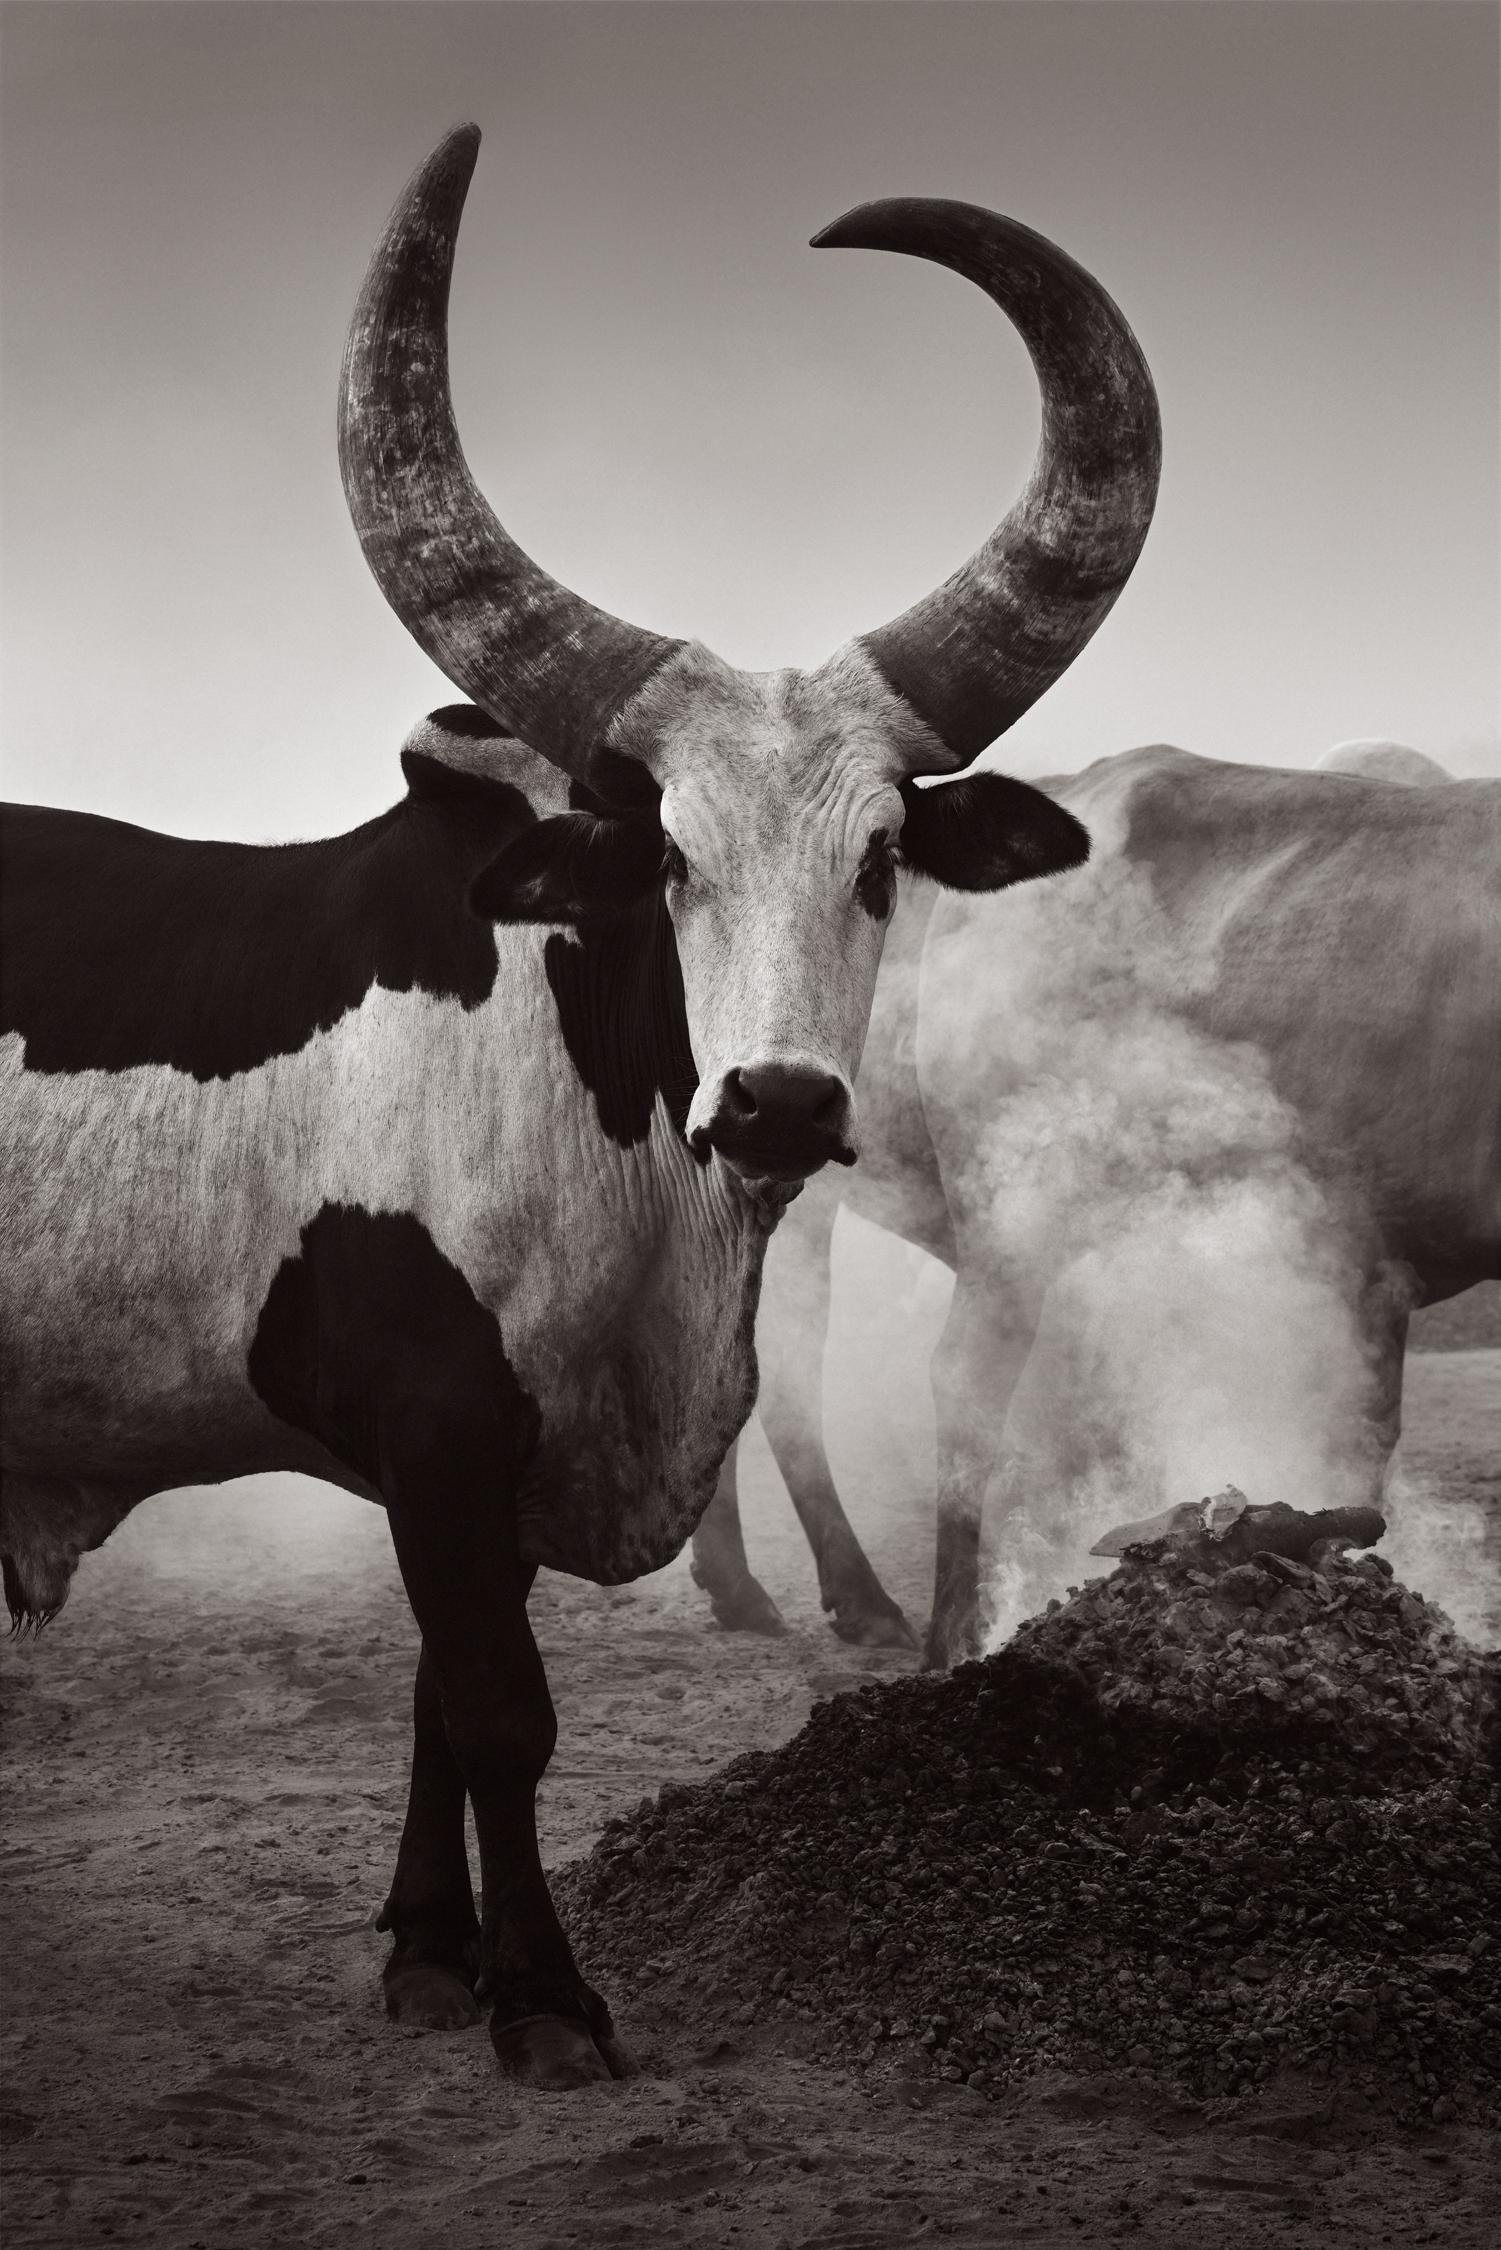 Drew Doggett Black and White Photograph - Black and White Portrait of a Cow with Beautiful, Sculptural Horns